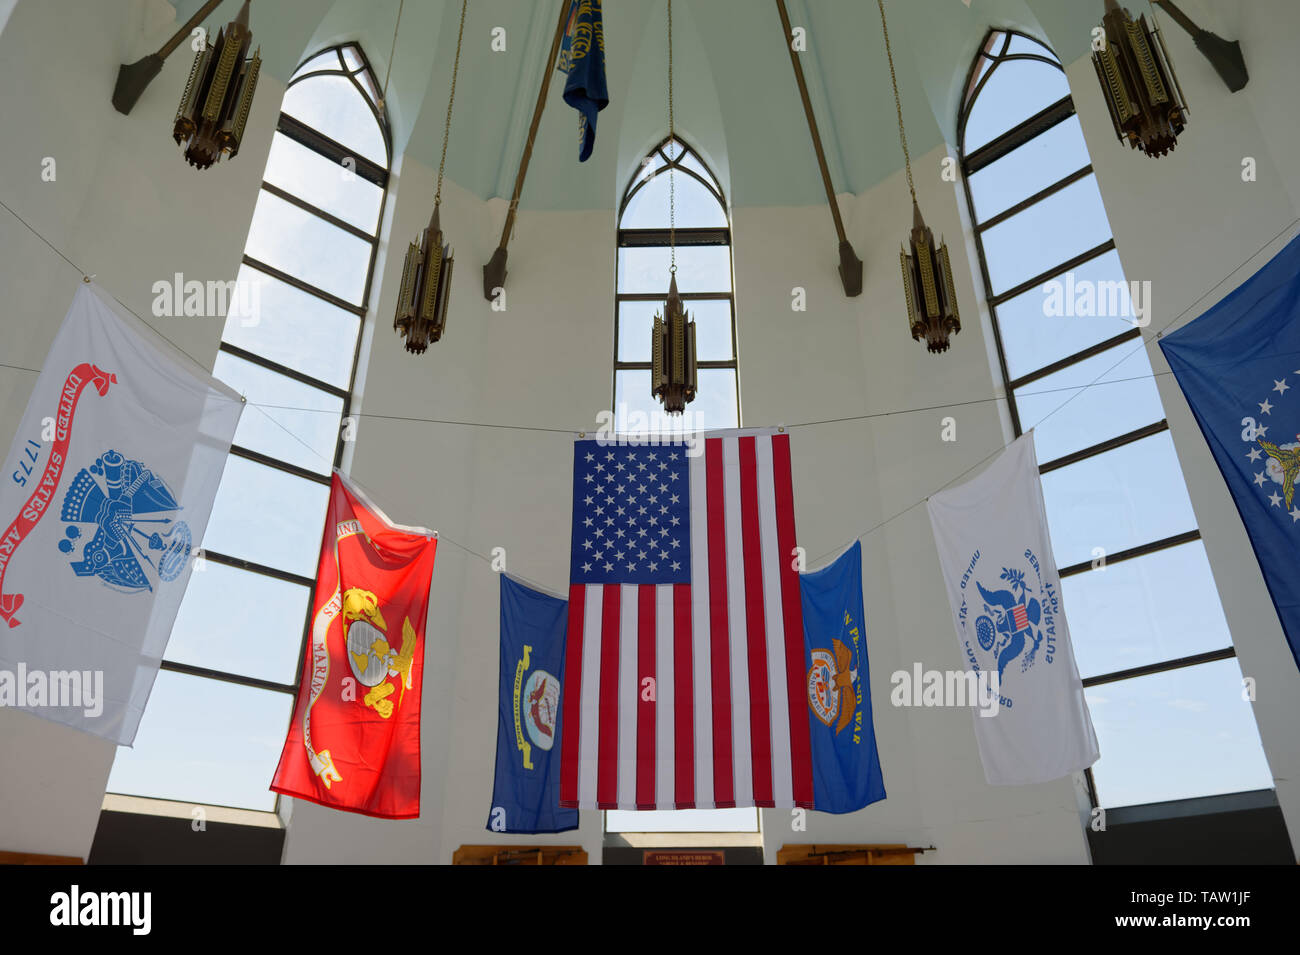 East Meadow, New York, USA. 25th May, 2019. The American Flag and military flags of the United States Armed Forces - Army, Navy, Marine Corps, Air Force, Coast Guard - are suspended in the high ceiling of the Nassau County Veterans Memorial Museum, open for visitors during Saturday of Memorial Day Weekend at Eisenhower Park on Long Island. Credit: Ann Parry/ZUMA Wire/Alamy Live News Stock Photo